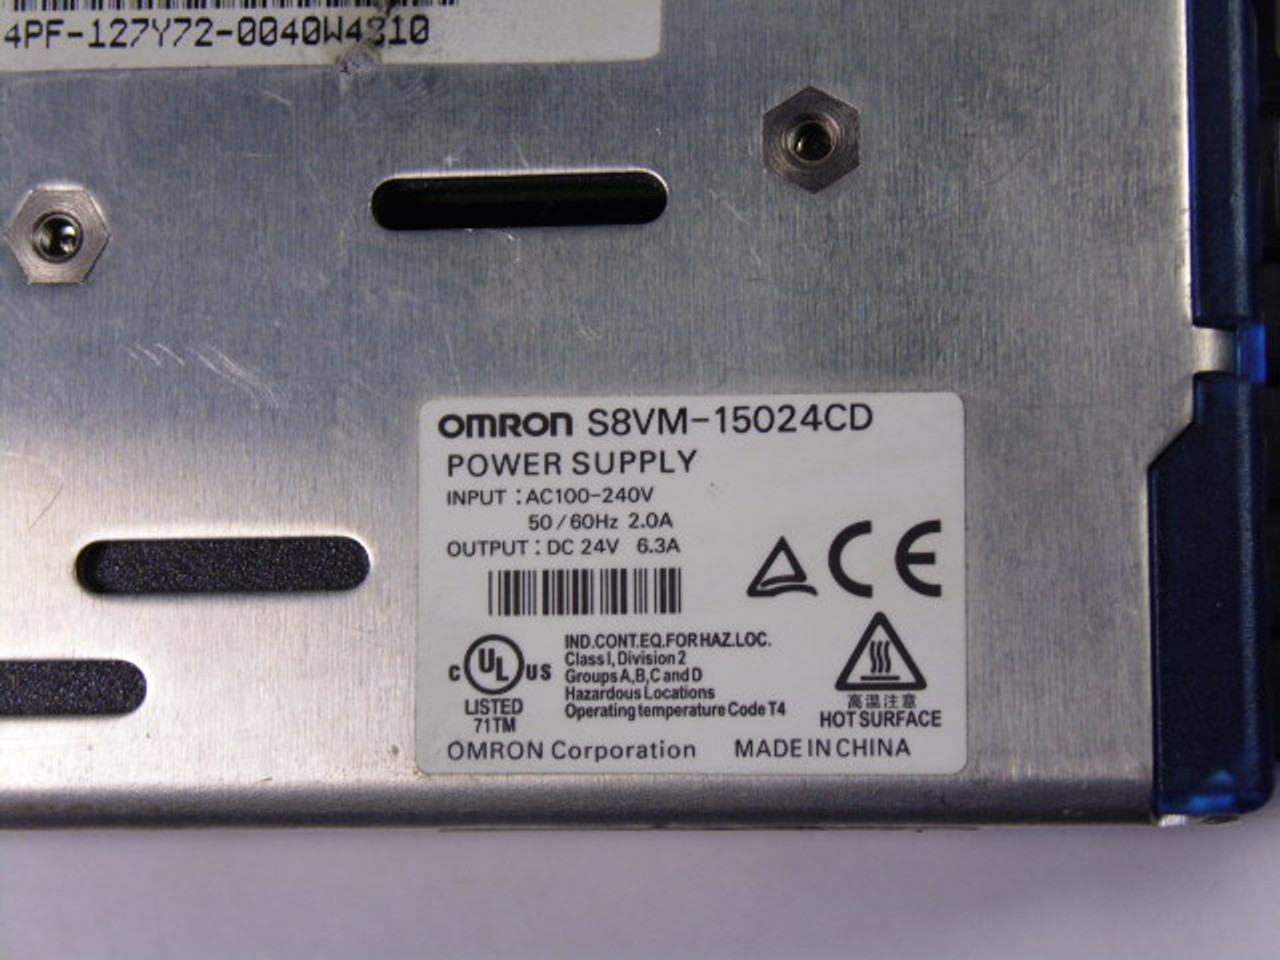 Omron S8VM-15024CD Power Supply Input-50/60Hz 2.0A Output-24V 6.3A USED